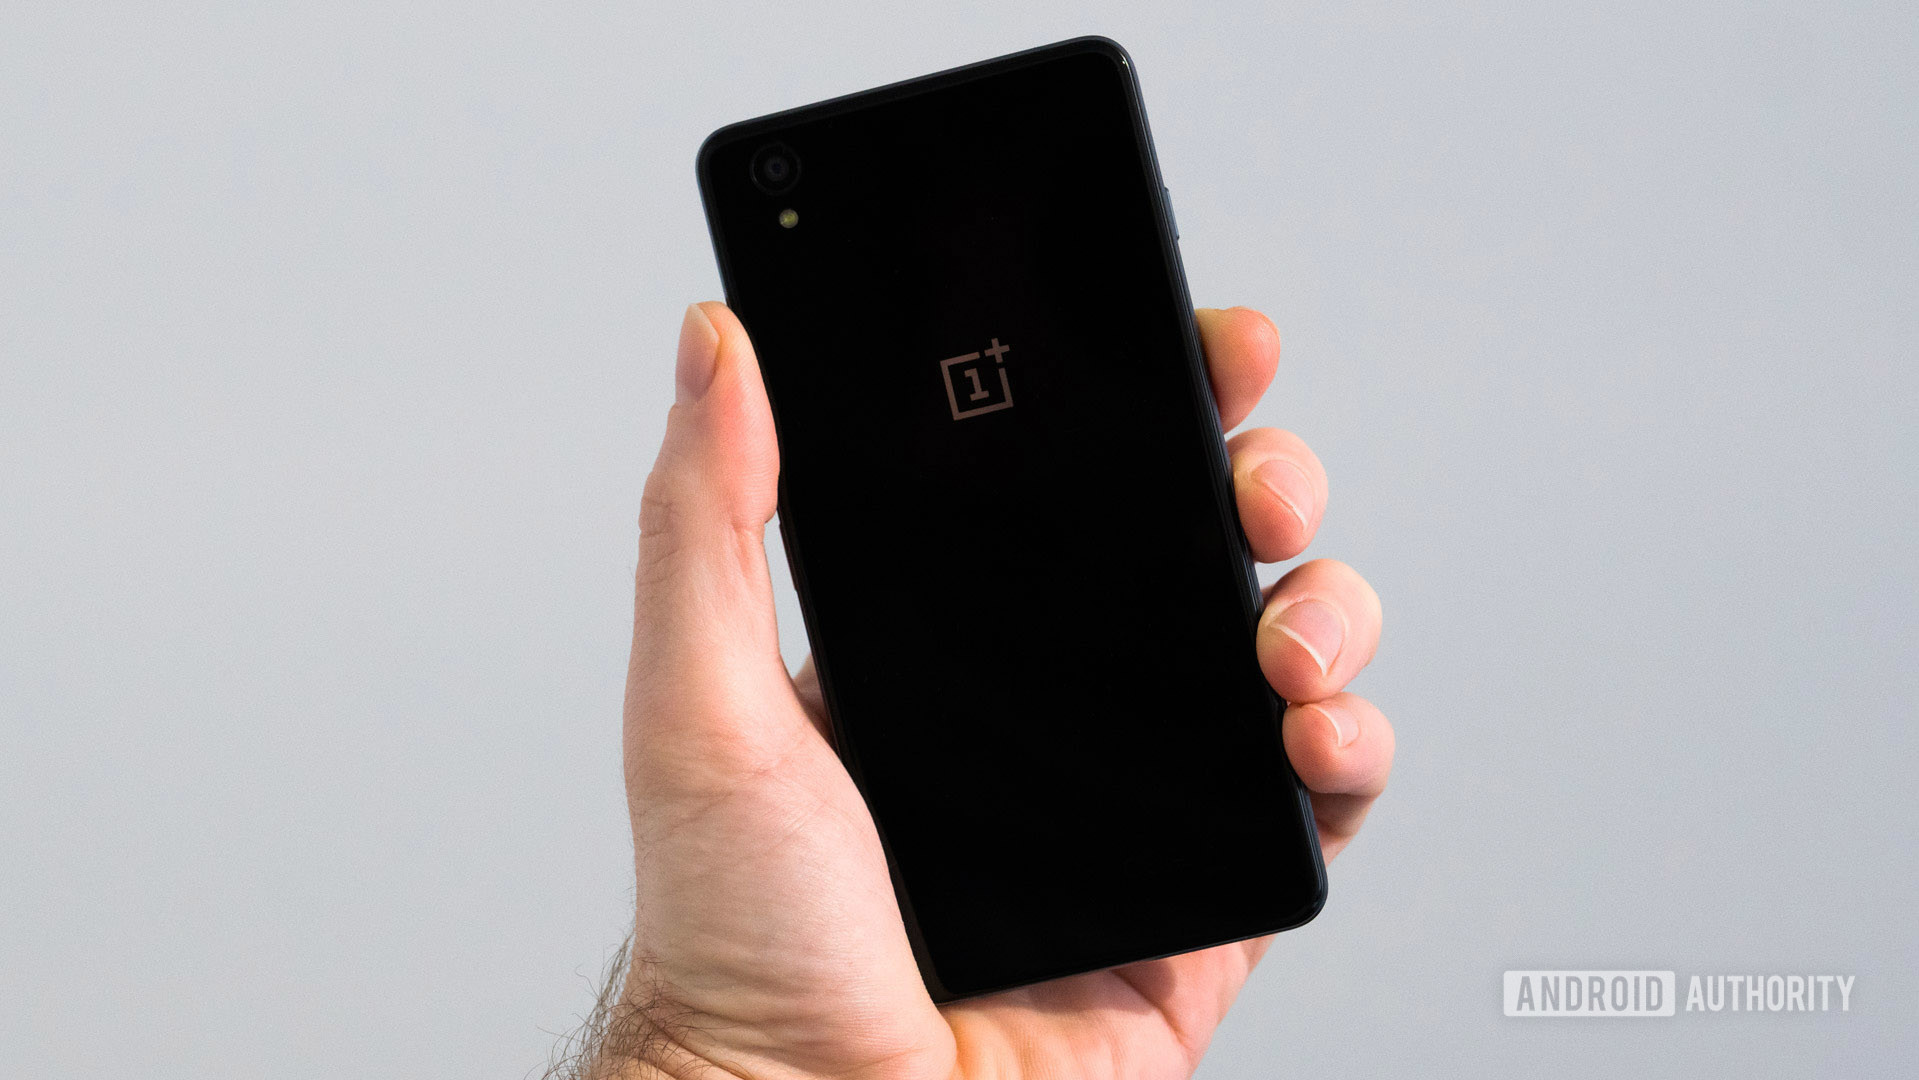 OnePlus X in hand with the Snapdragon 801, one of the best Android processors